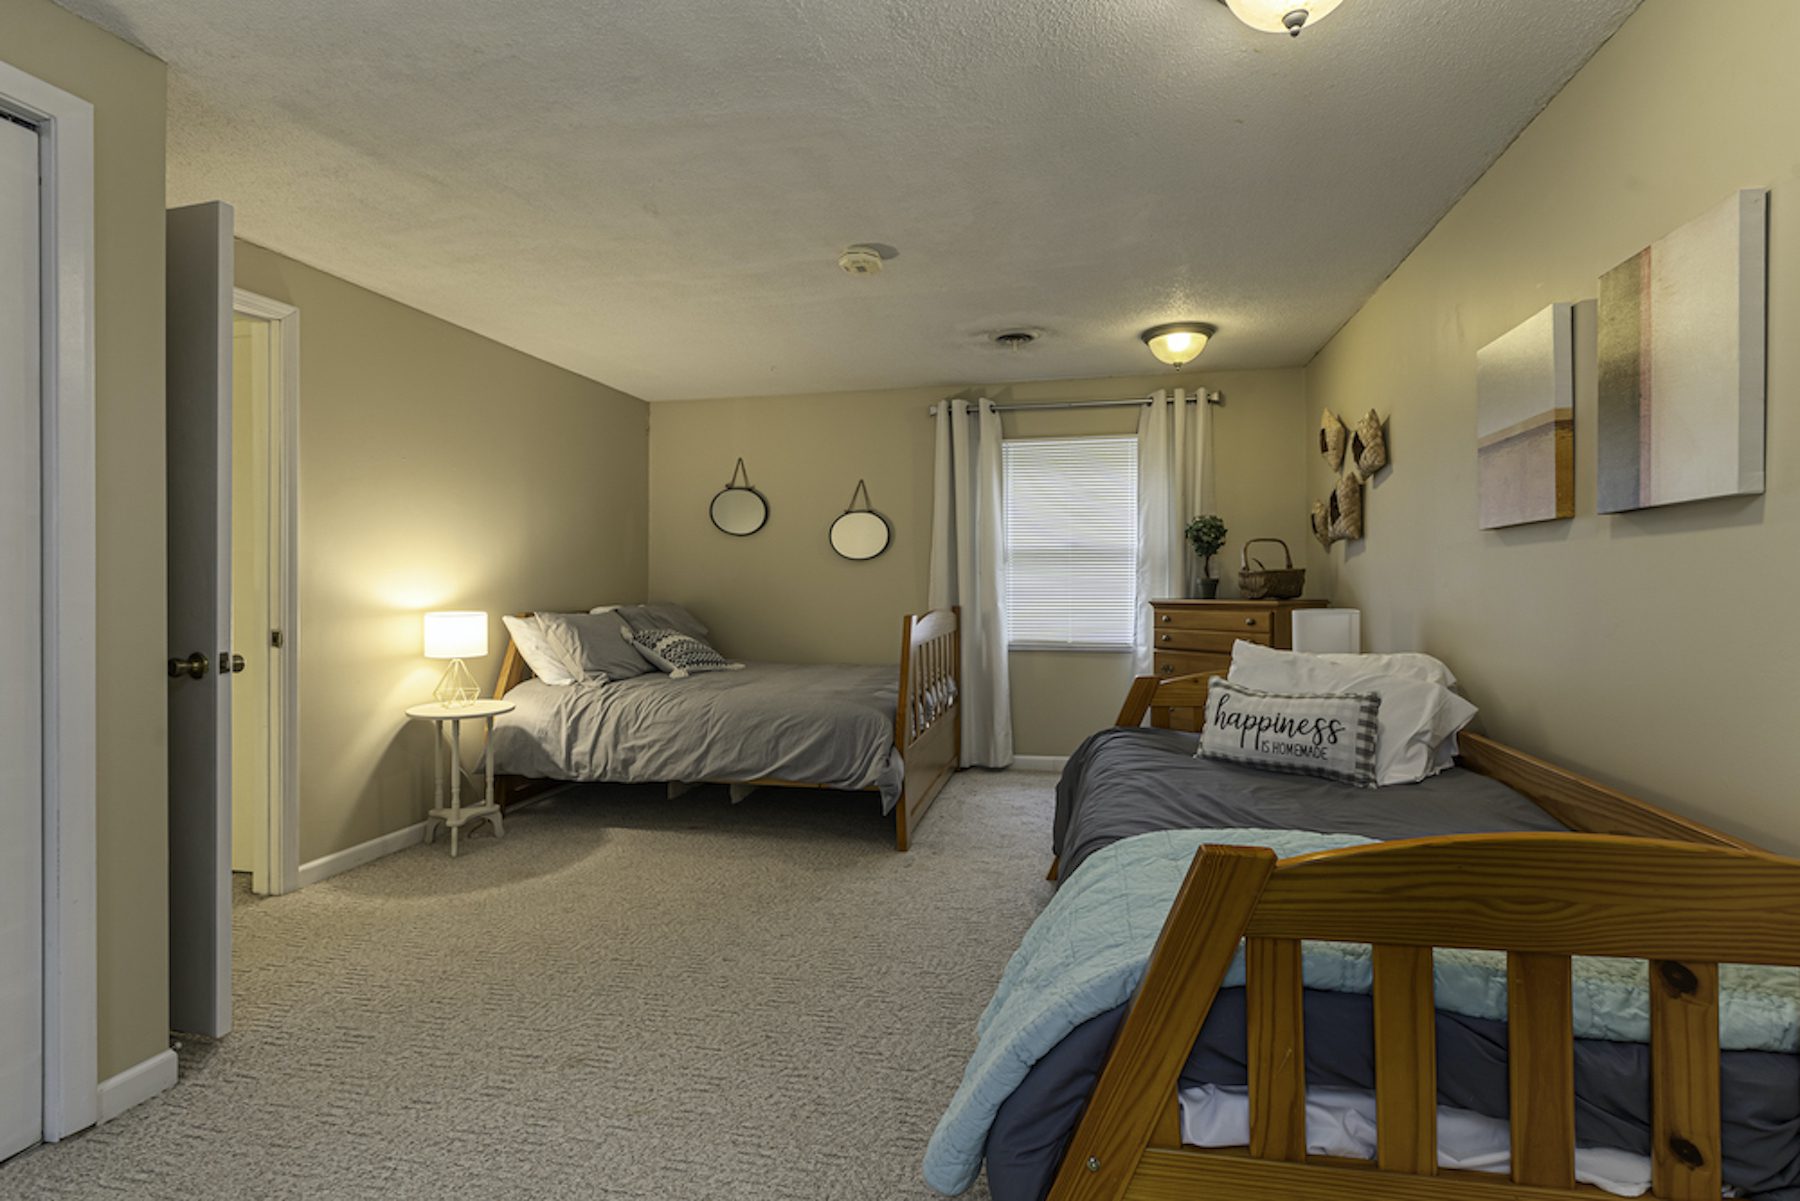 southern-bedroom-beds-creal-springs-illinois